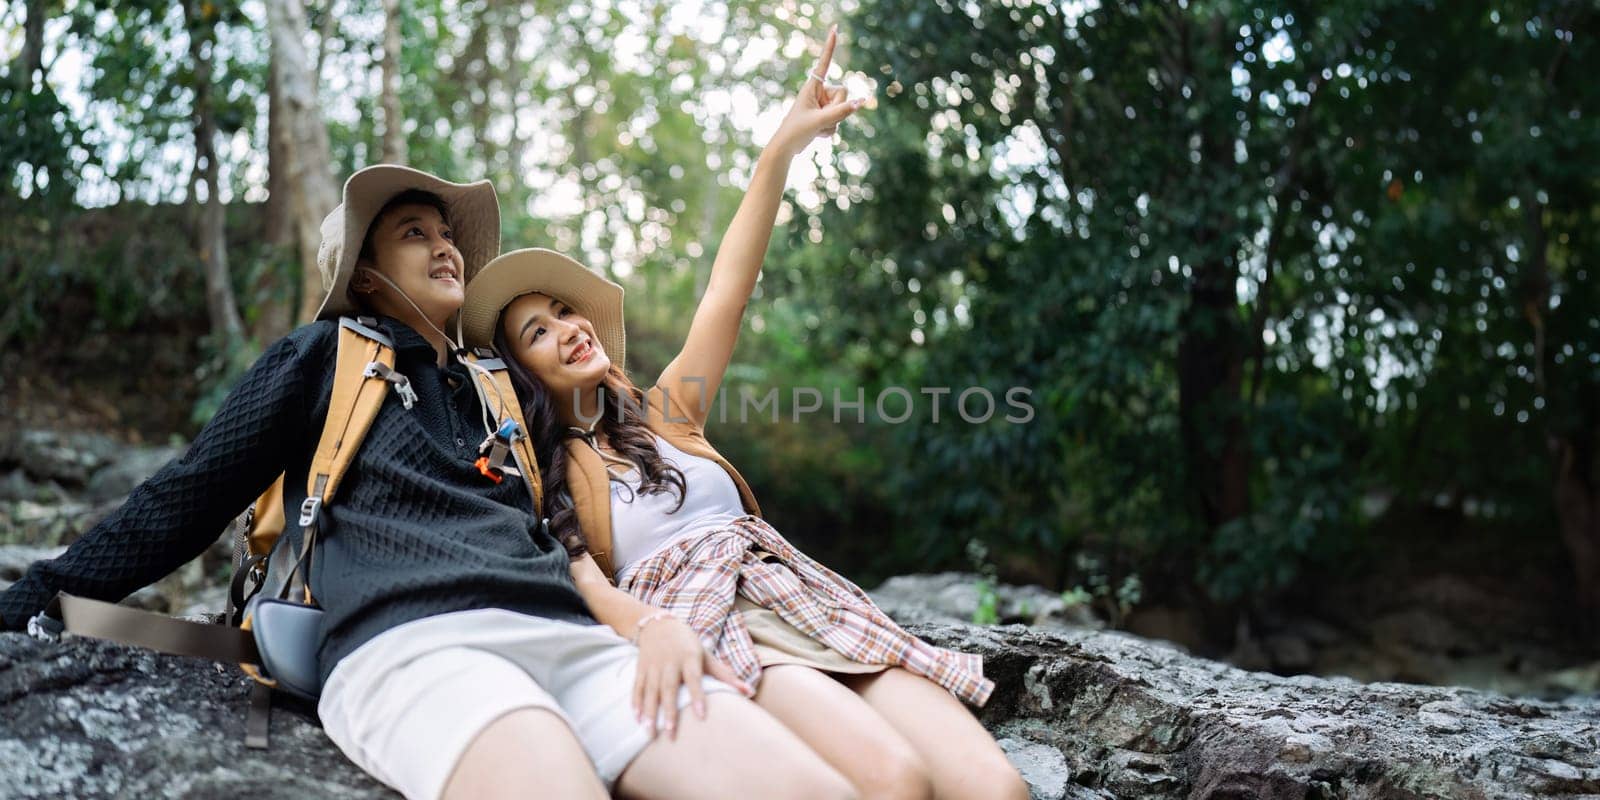 Lesbian couple relaxing together on rock at a hiking trail While traveling together on a hiking trail.